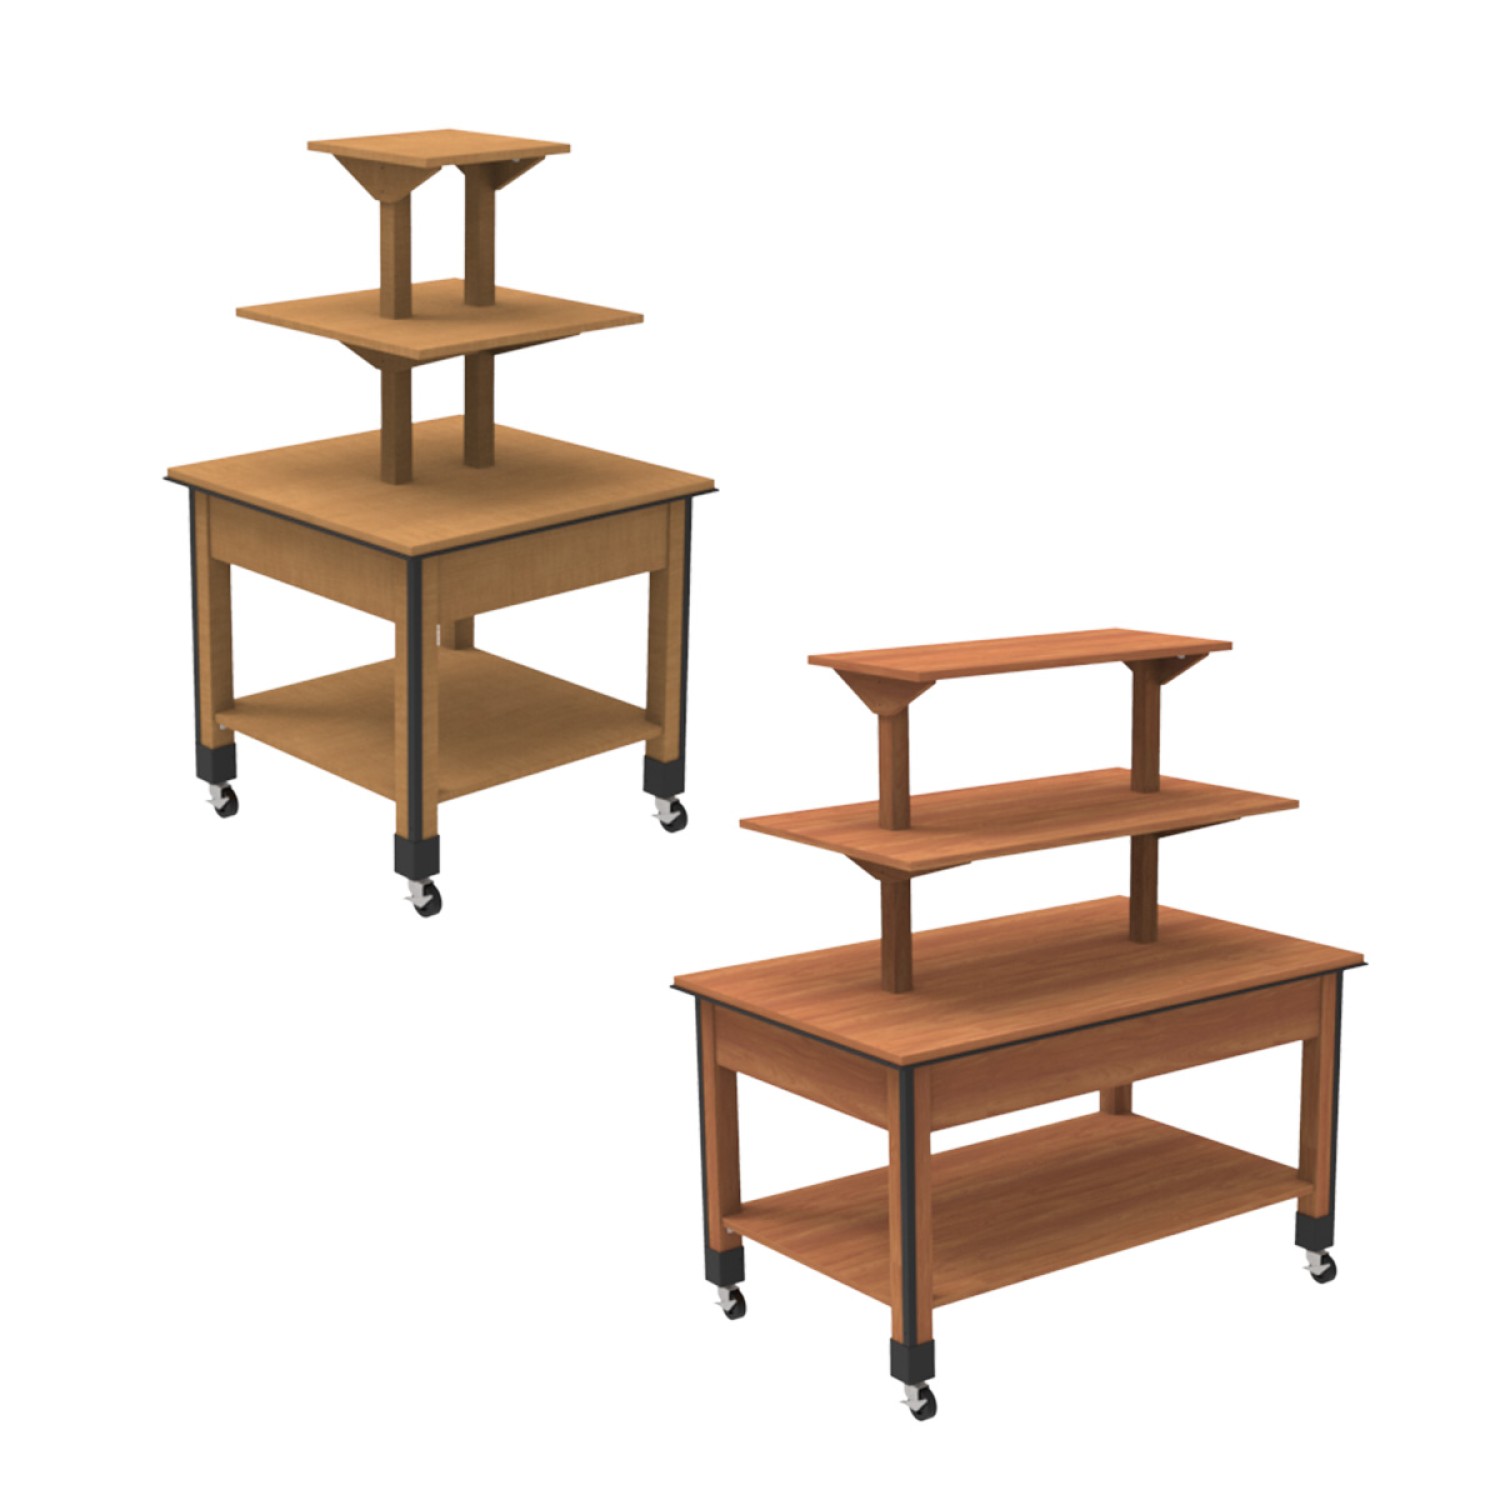 Bakery | Bakery Nesting & Tiered Tables | Tiered Merchandising Table ...